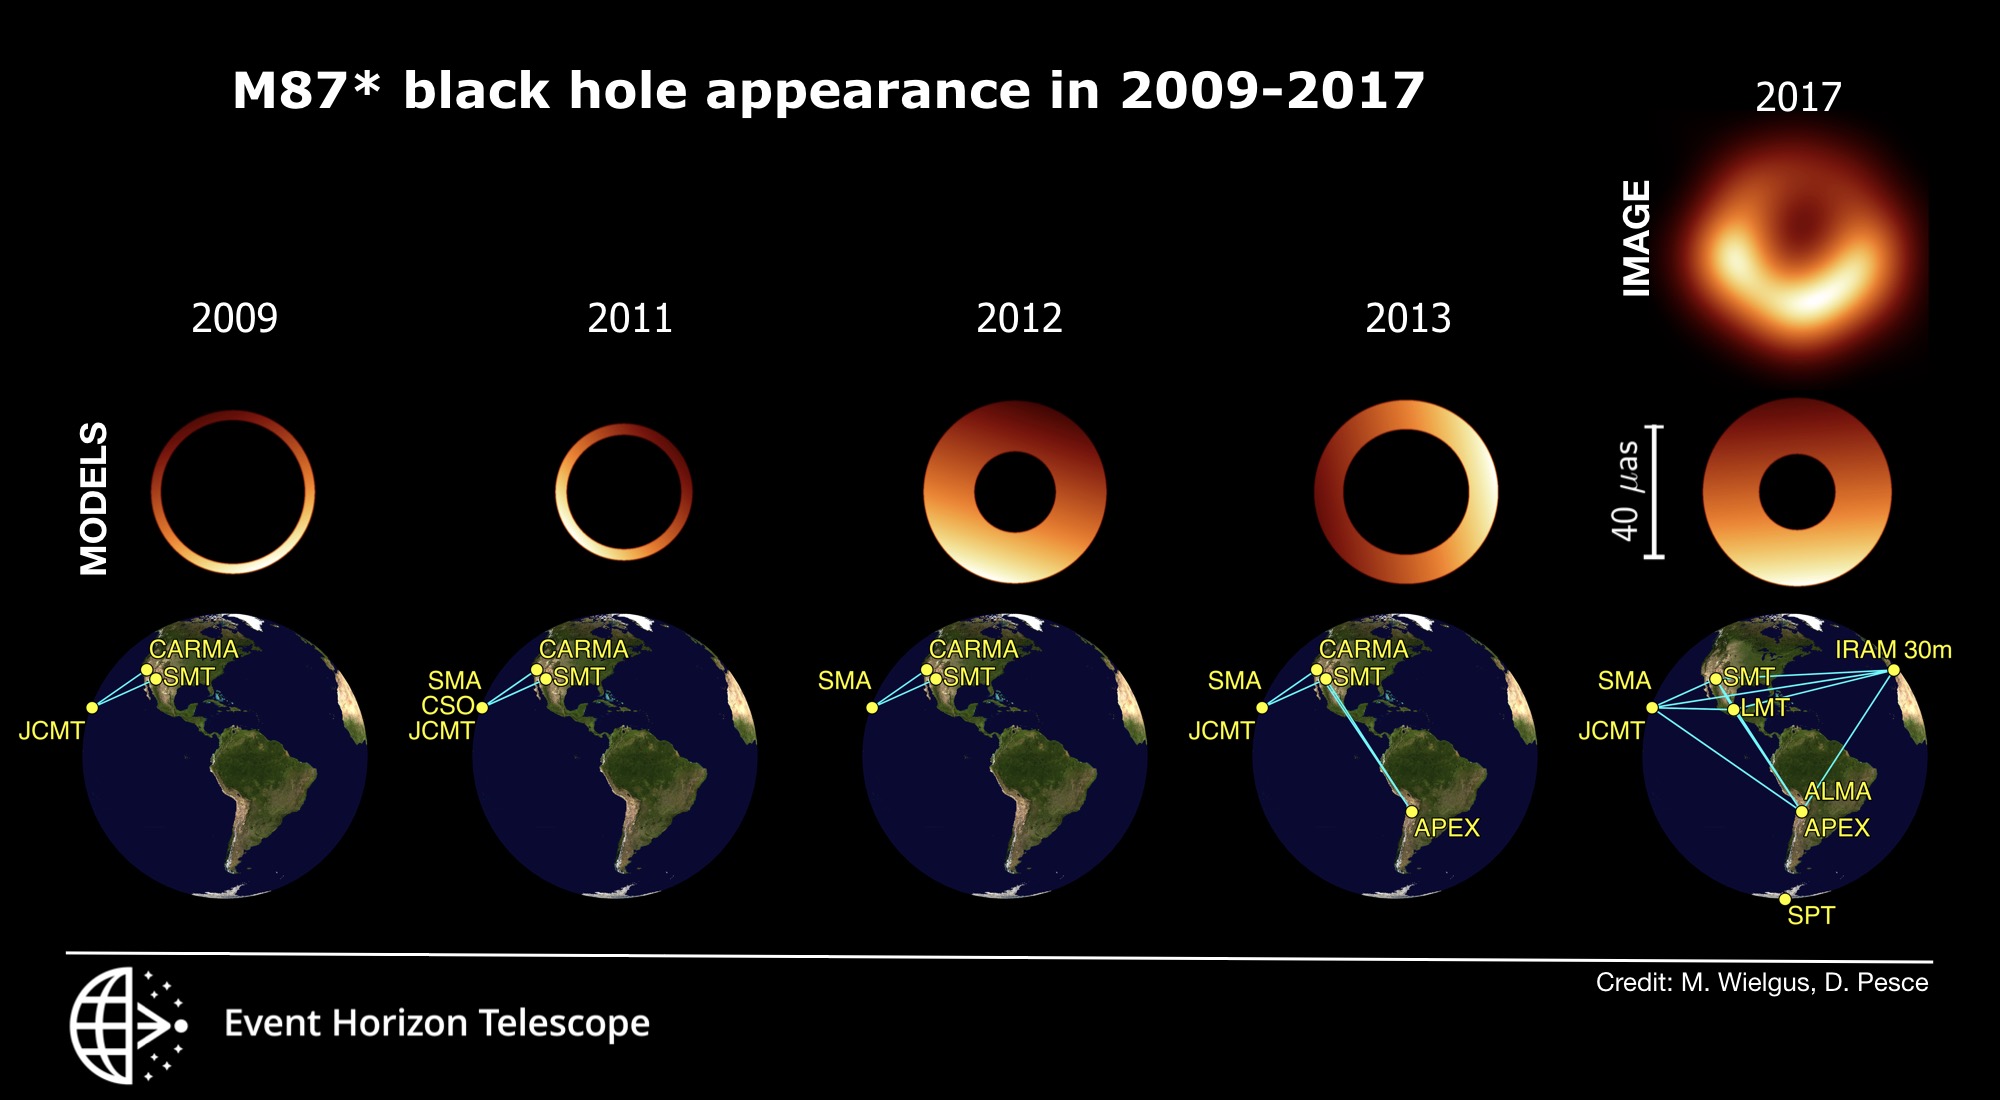 Snapshots of the M87* black hole obtained through imaging/geometric modeling and the array of EHT telescopes in 2009-2017.  The diameter of all rings is similar, but the location of the positive side varies.